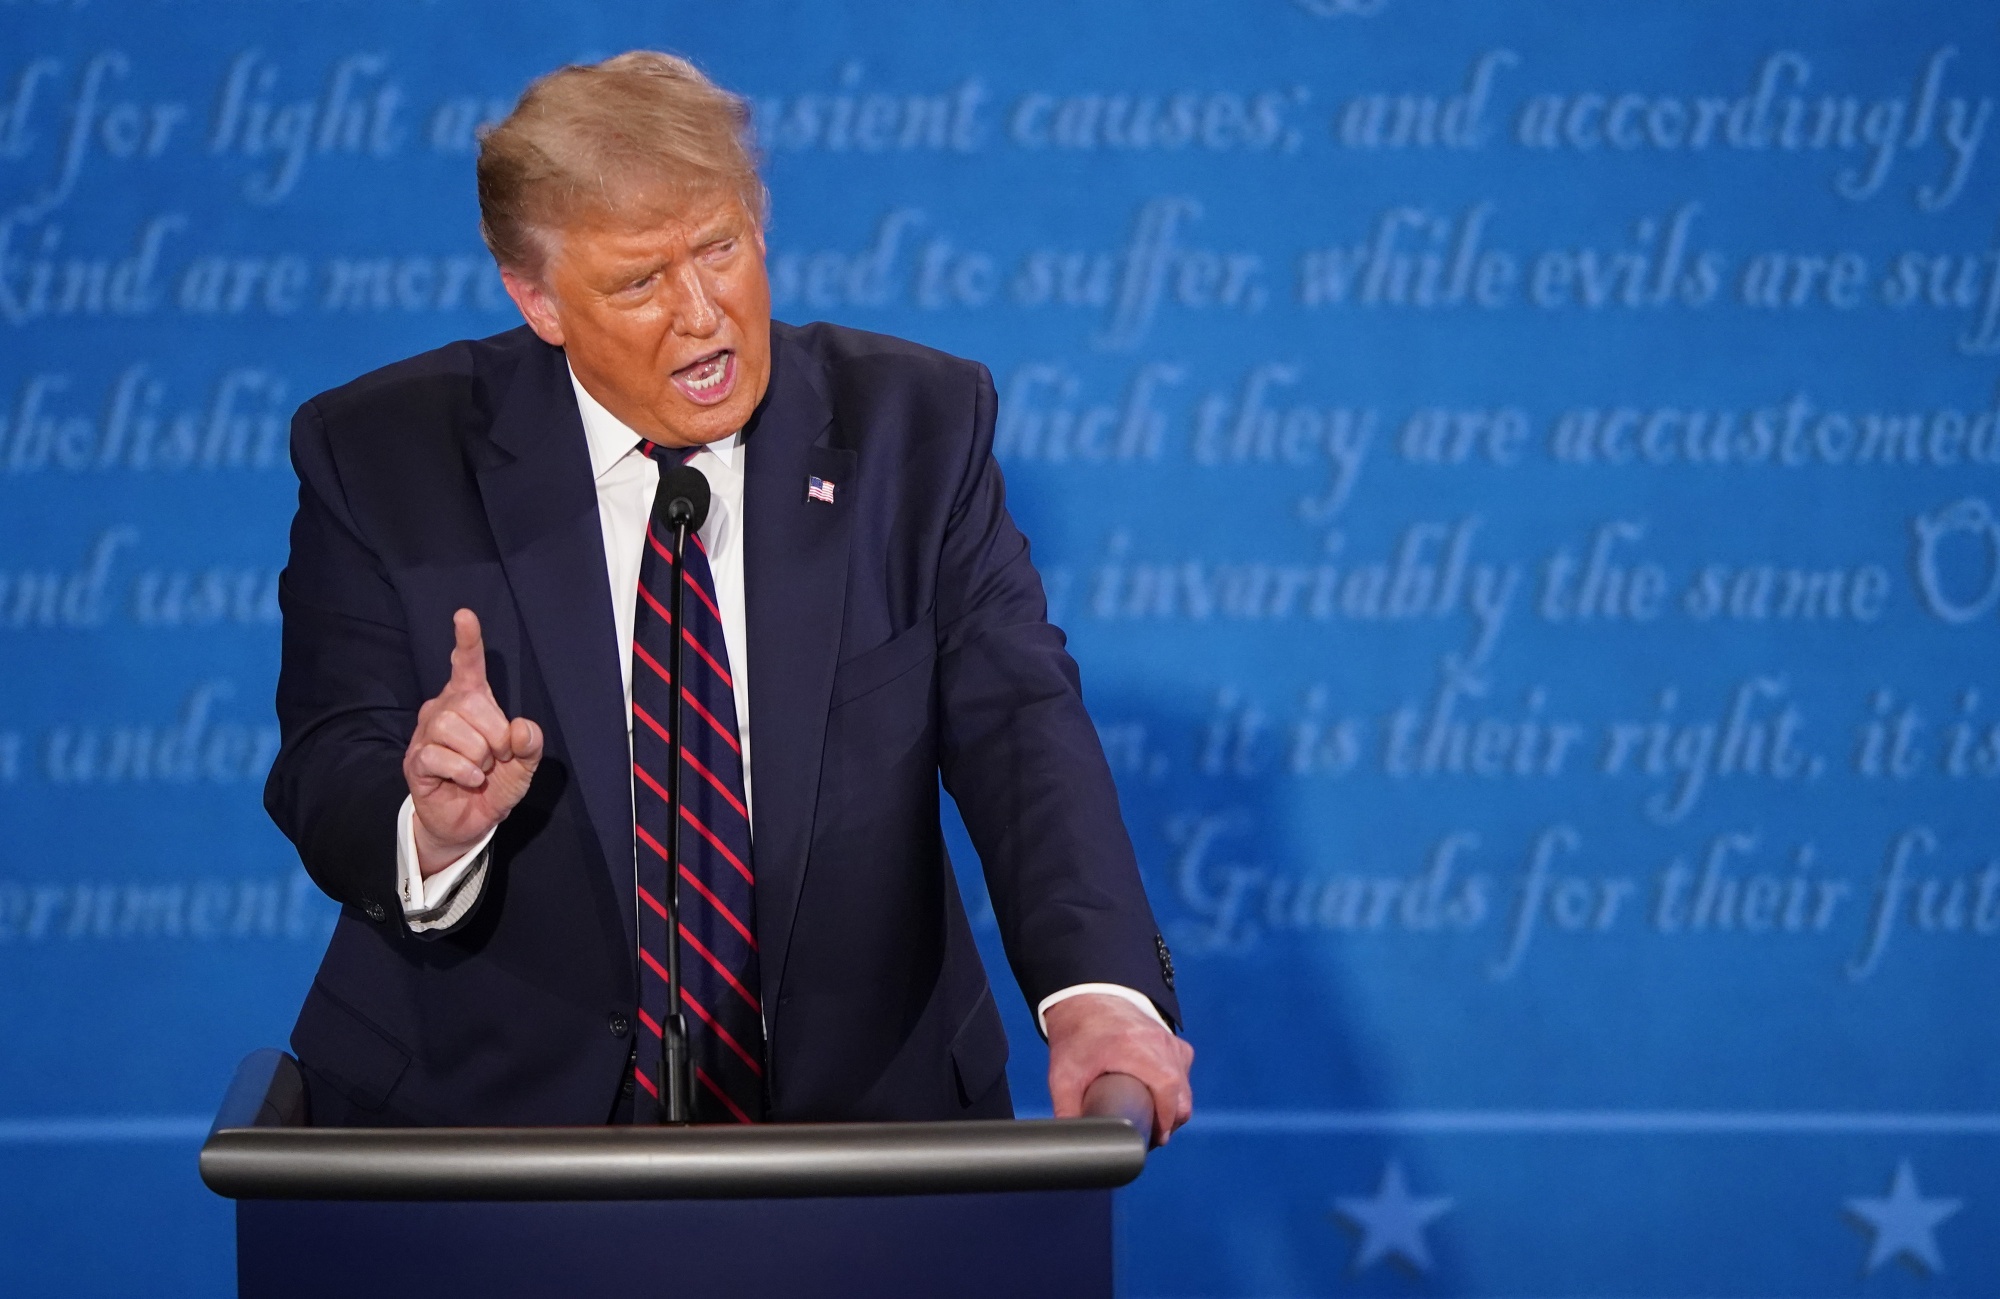 President Donald Trump speaks during the first U.S. presidential debate in Cleveland, Ohio on Sept. 29, 2020.&nbsp;